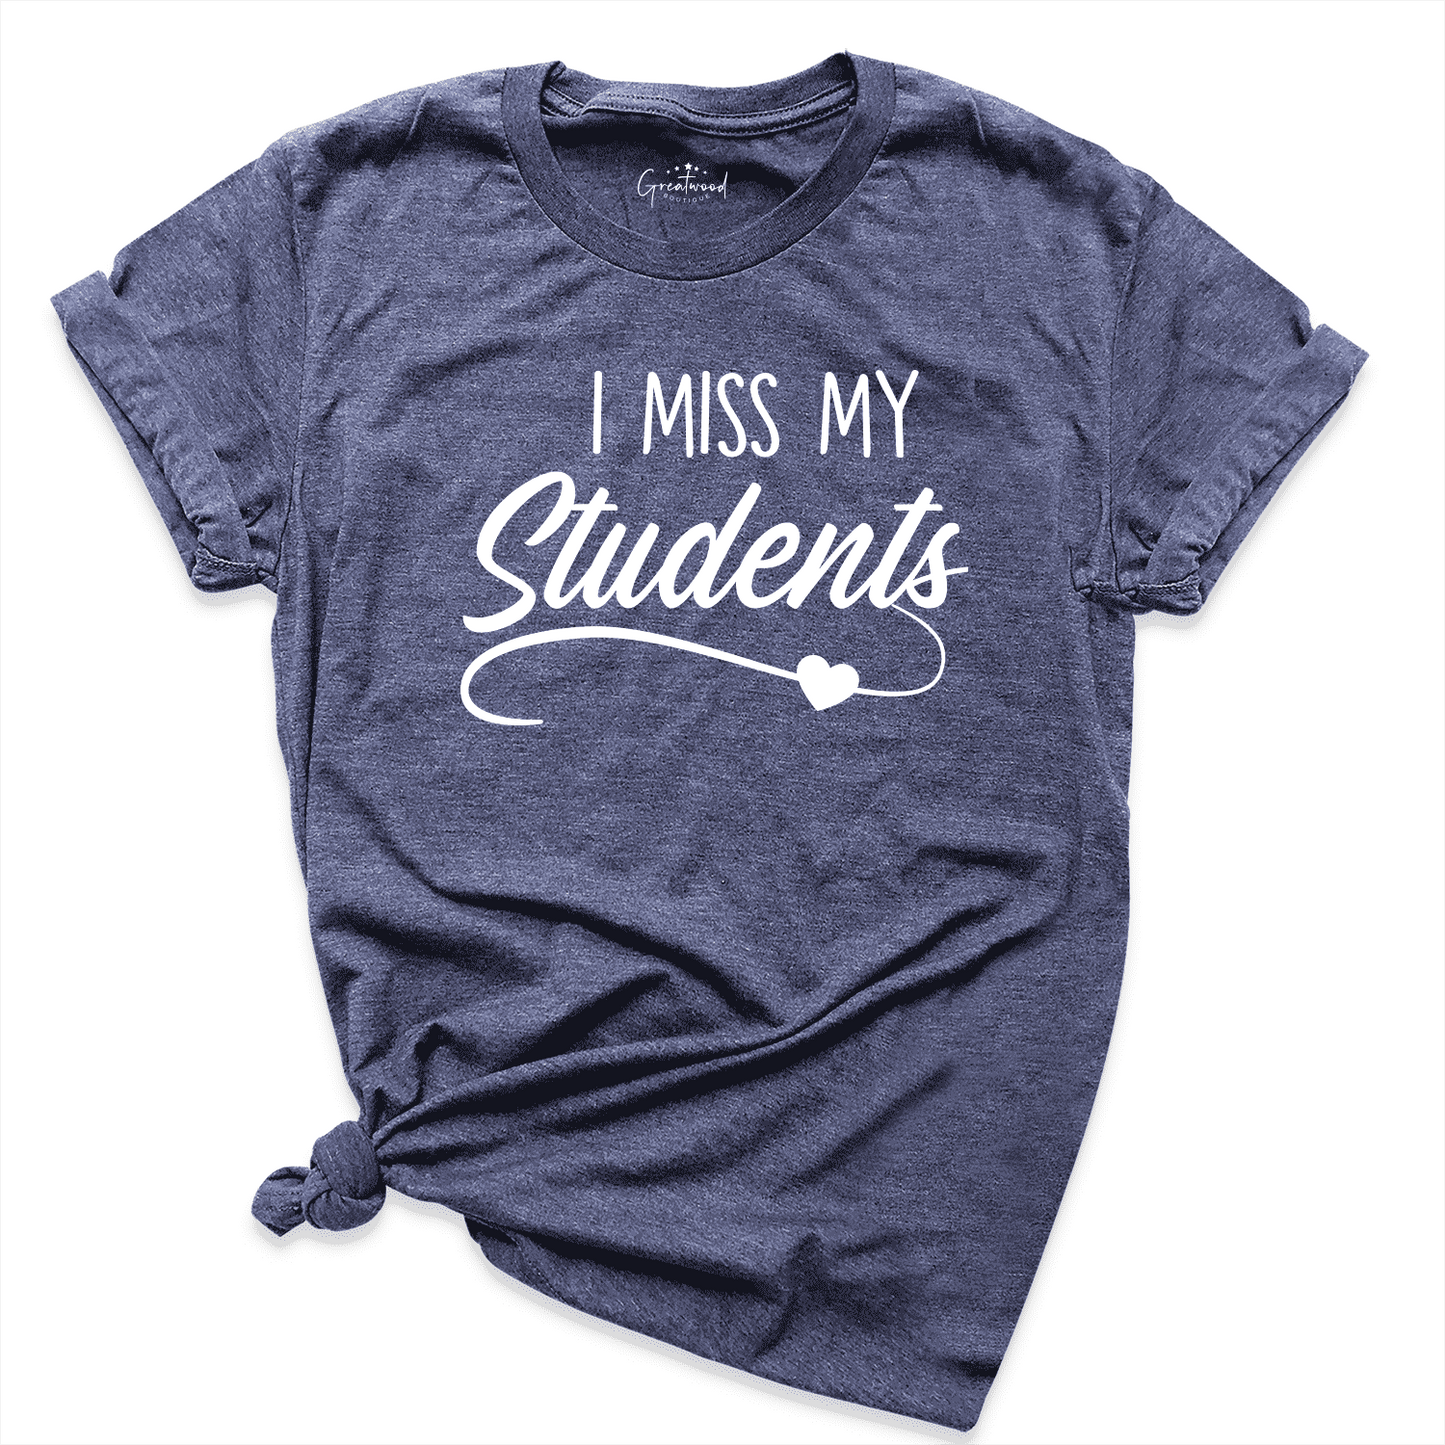 I Miss My Students Shirt Navy - Greatwood Boutique